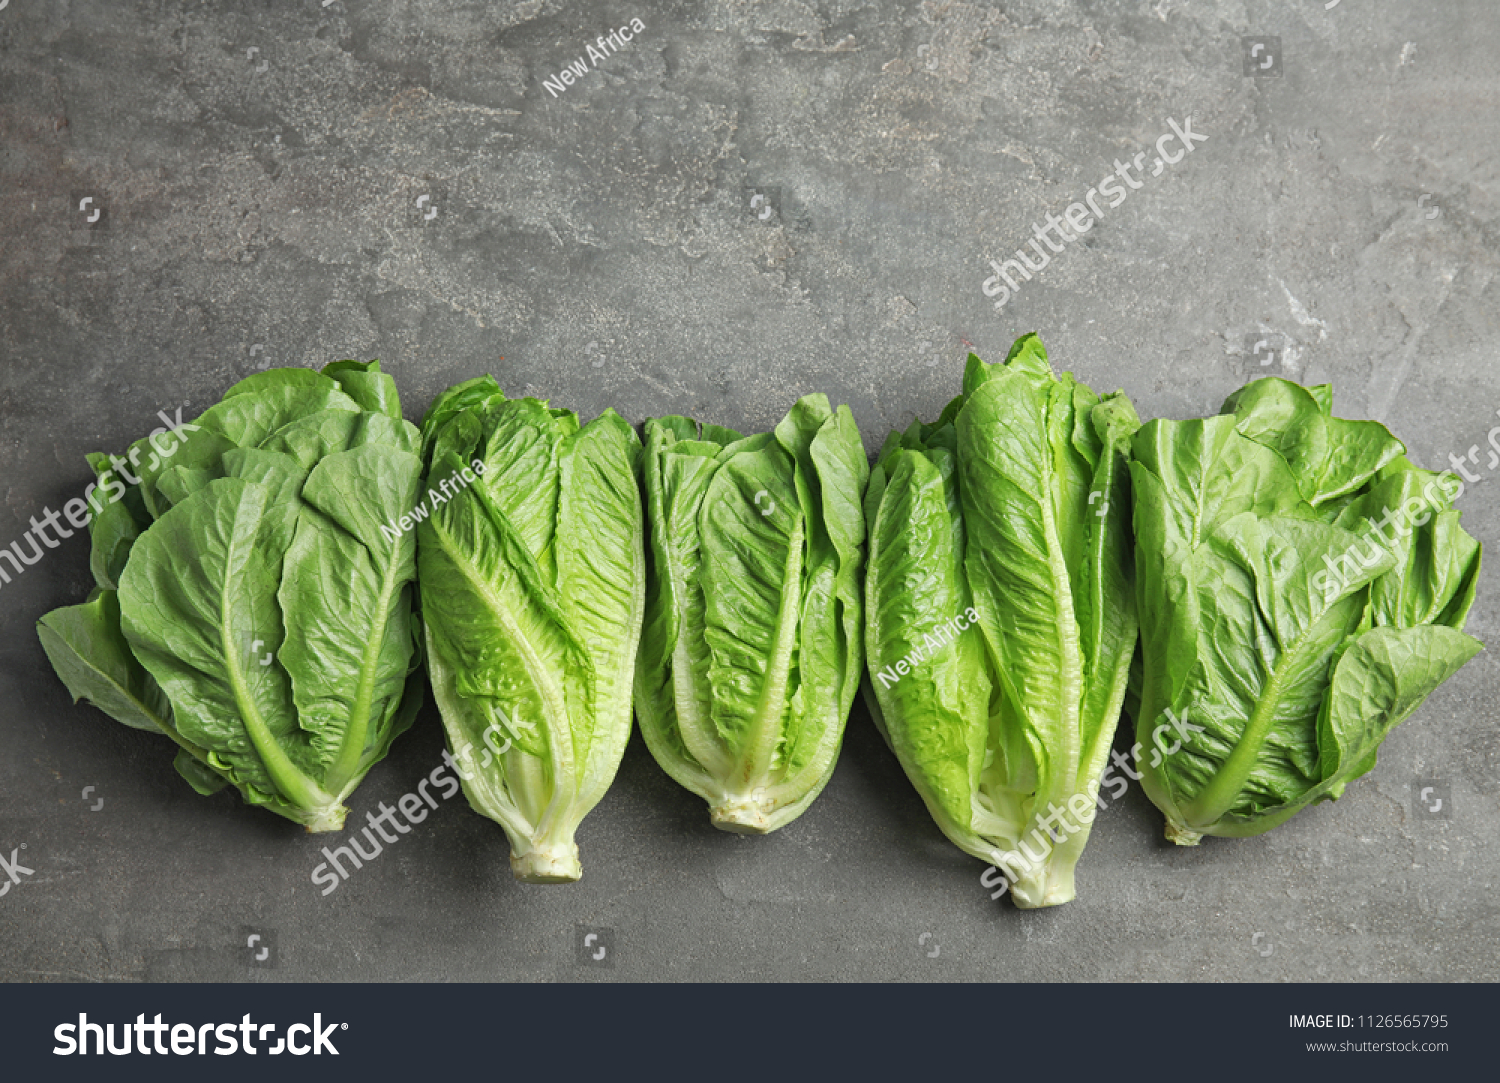 Fresh ripe cos lettuce on gray background, top view #1126565795